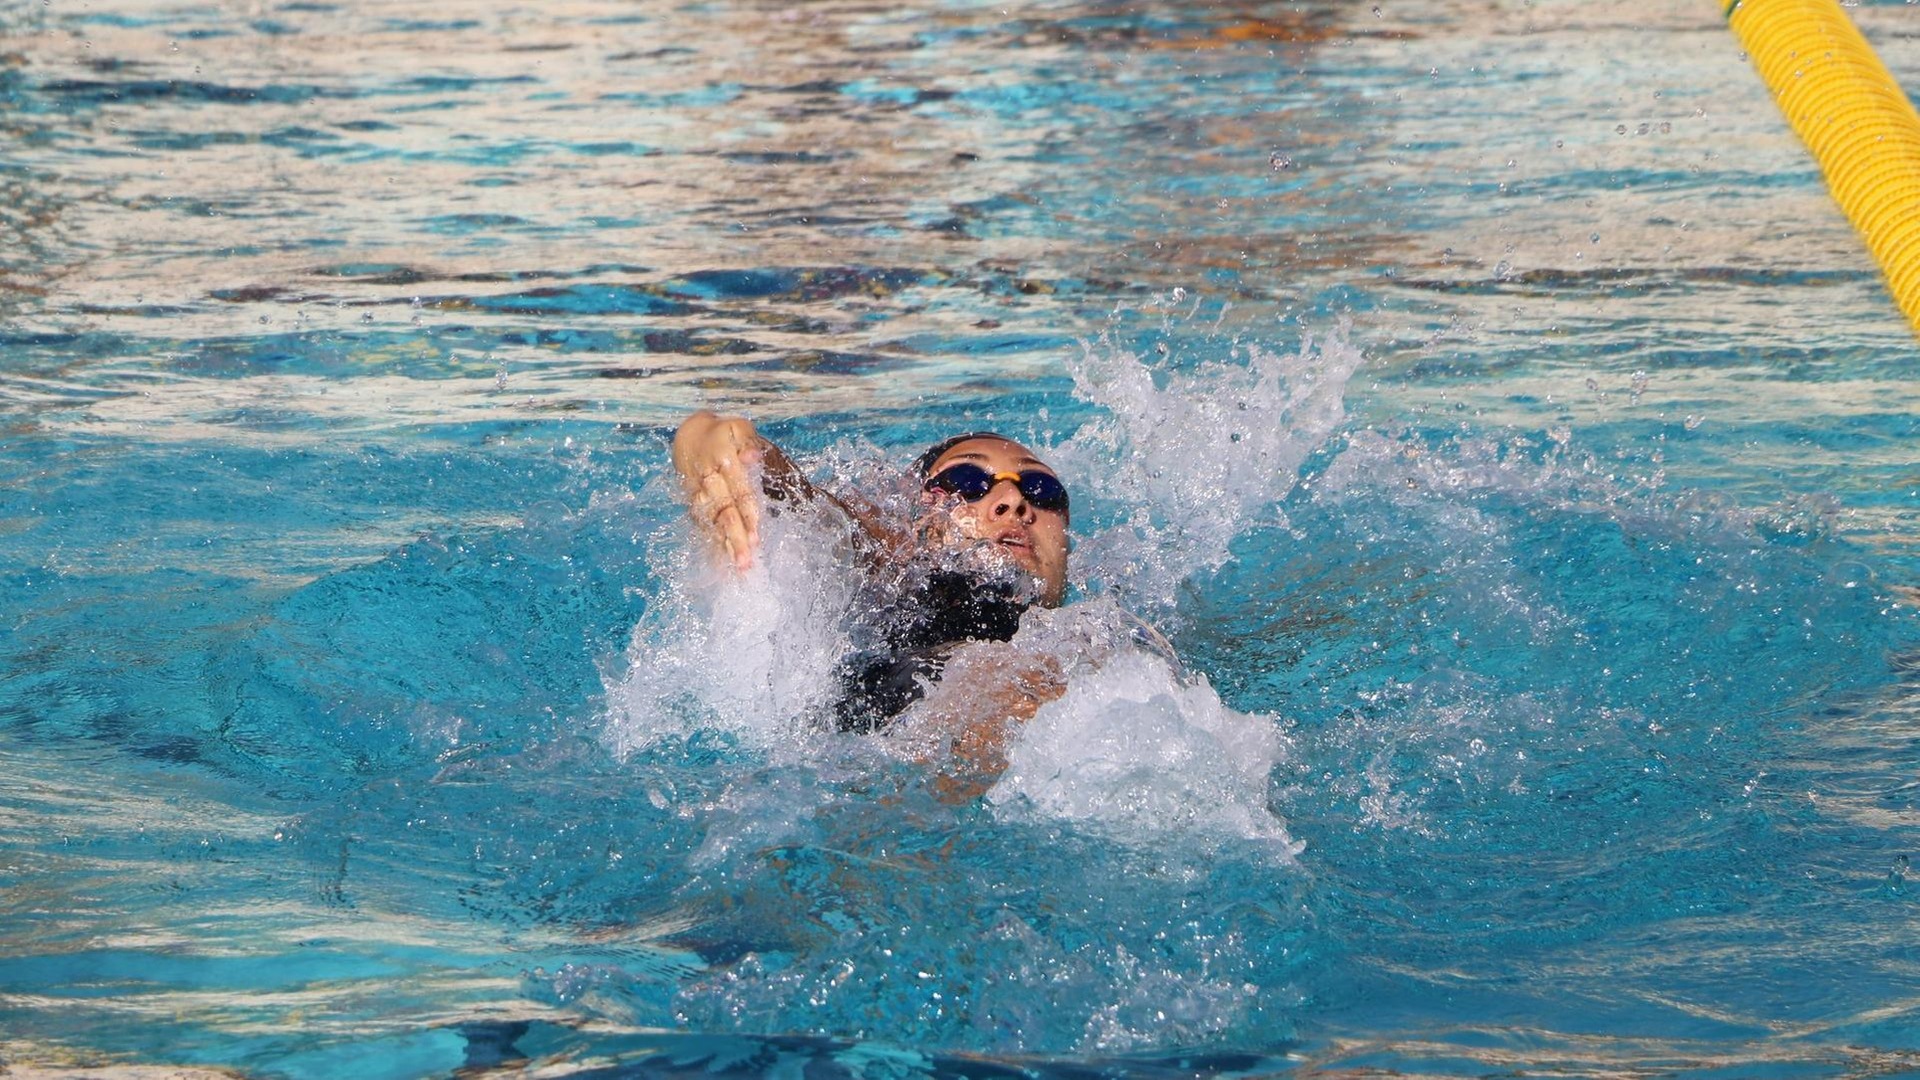 Annika Sharma earned two silvers - one individual and one relay